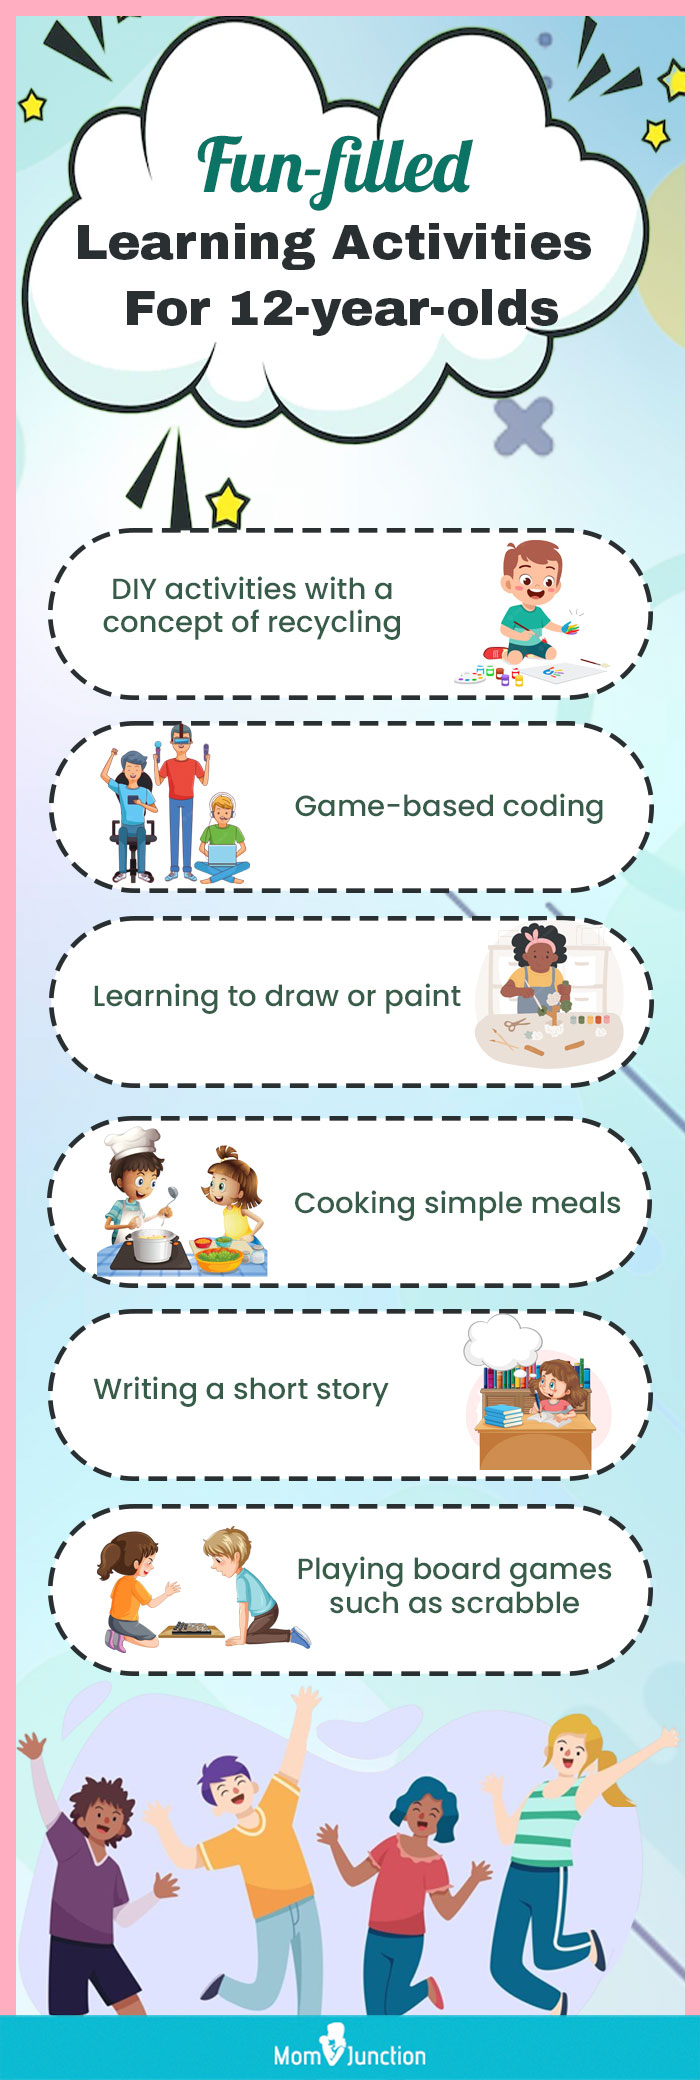 facilitate fun based learning for 12 year old (infographic)